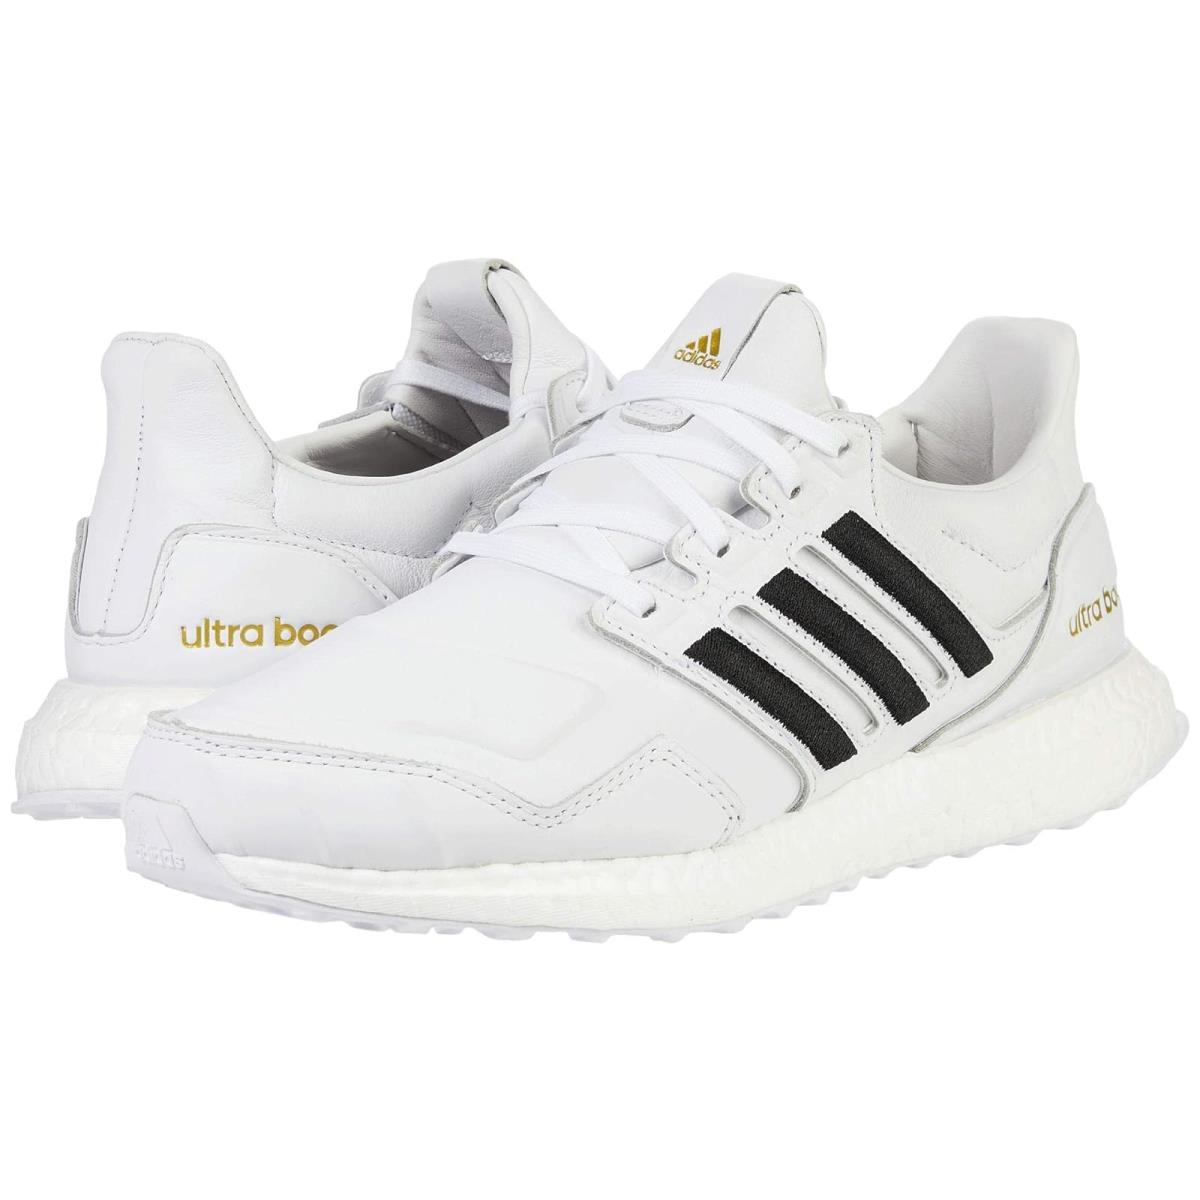 Unisex Sneakers Athletic Shoes Adidas Running Ultraboost Dna Lea Footwear White/Core Black/Gold Metal